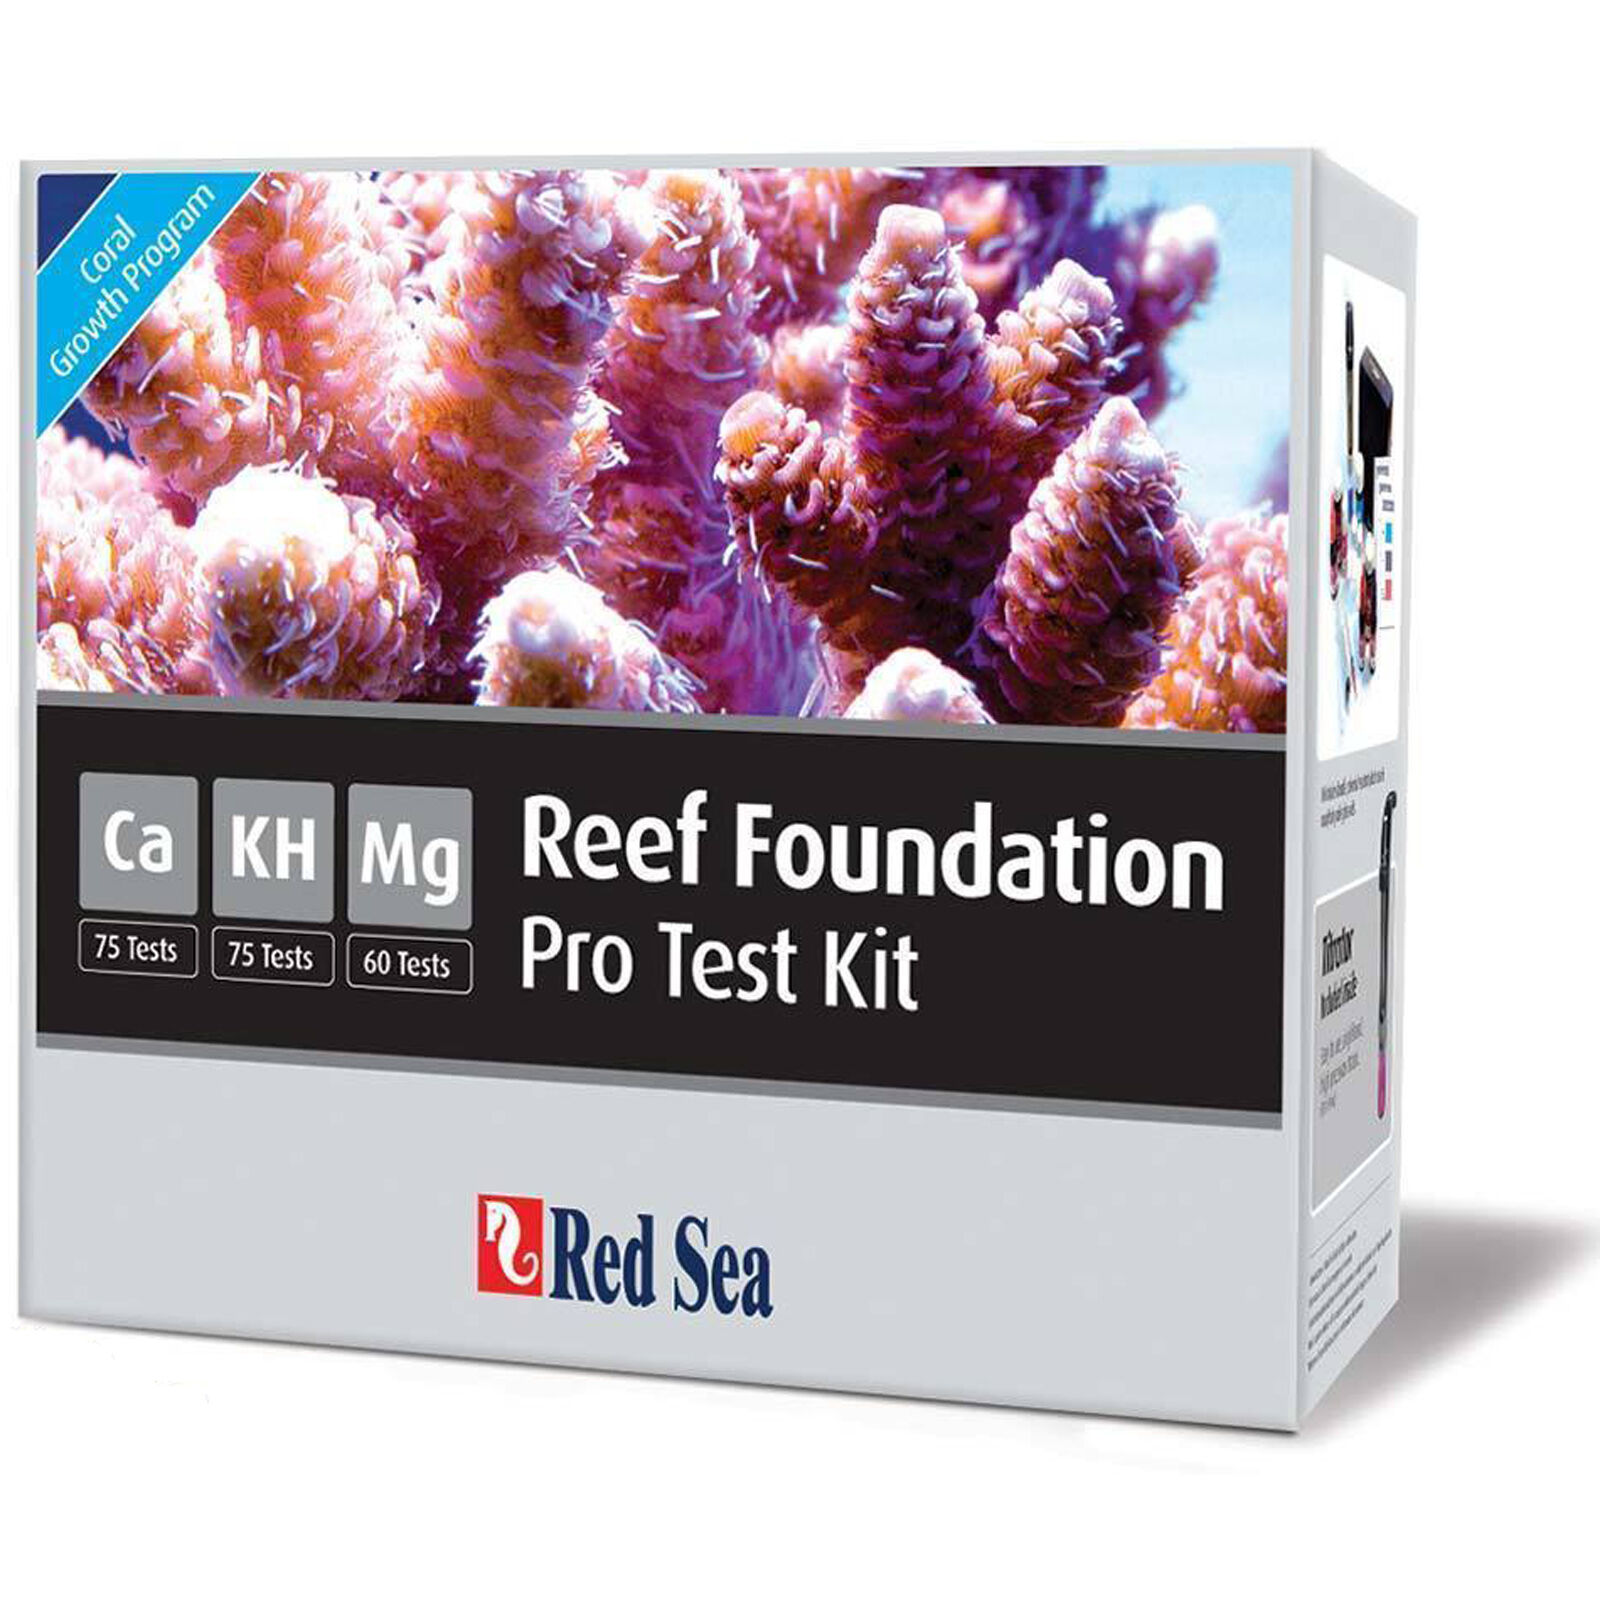 Red Sea Reef Foundation Pro Test Kit Ca KH Mg Coral Nano Reef FREE USA SHIPPING